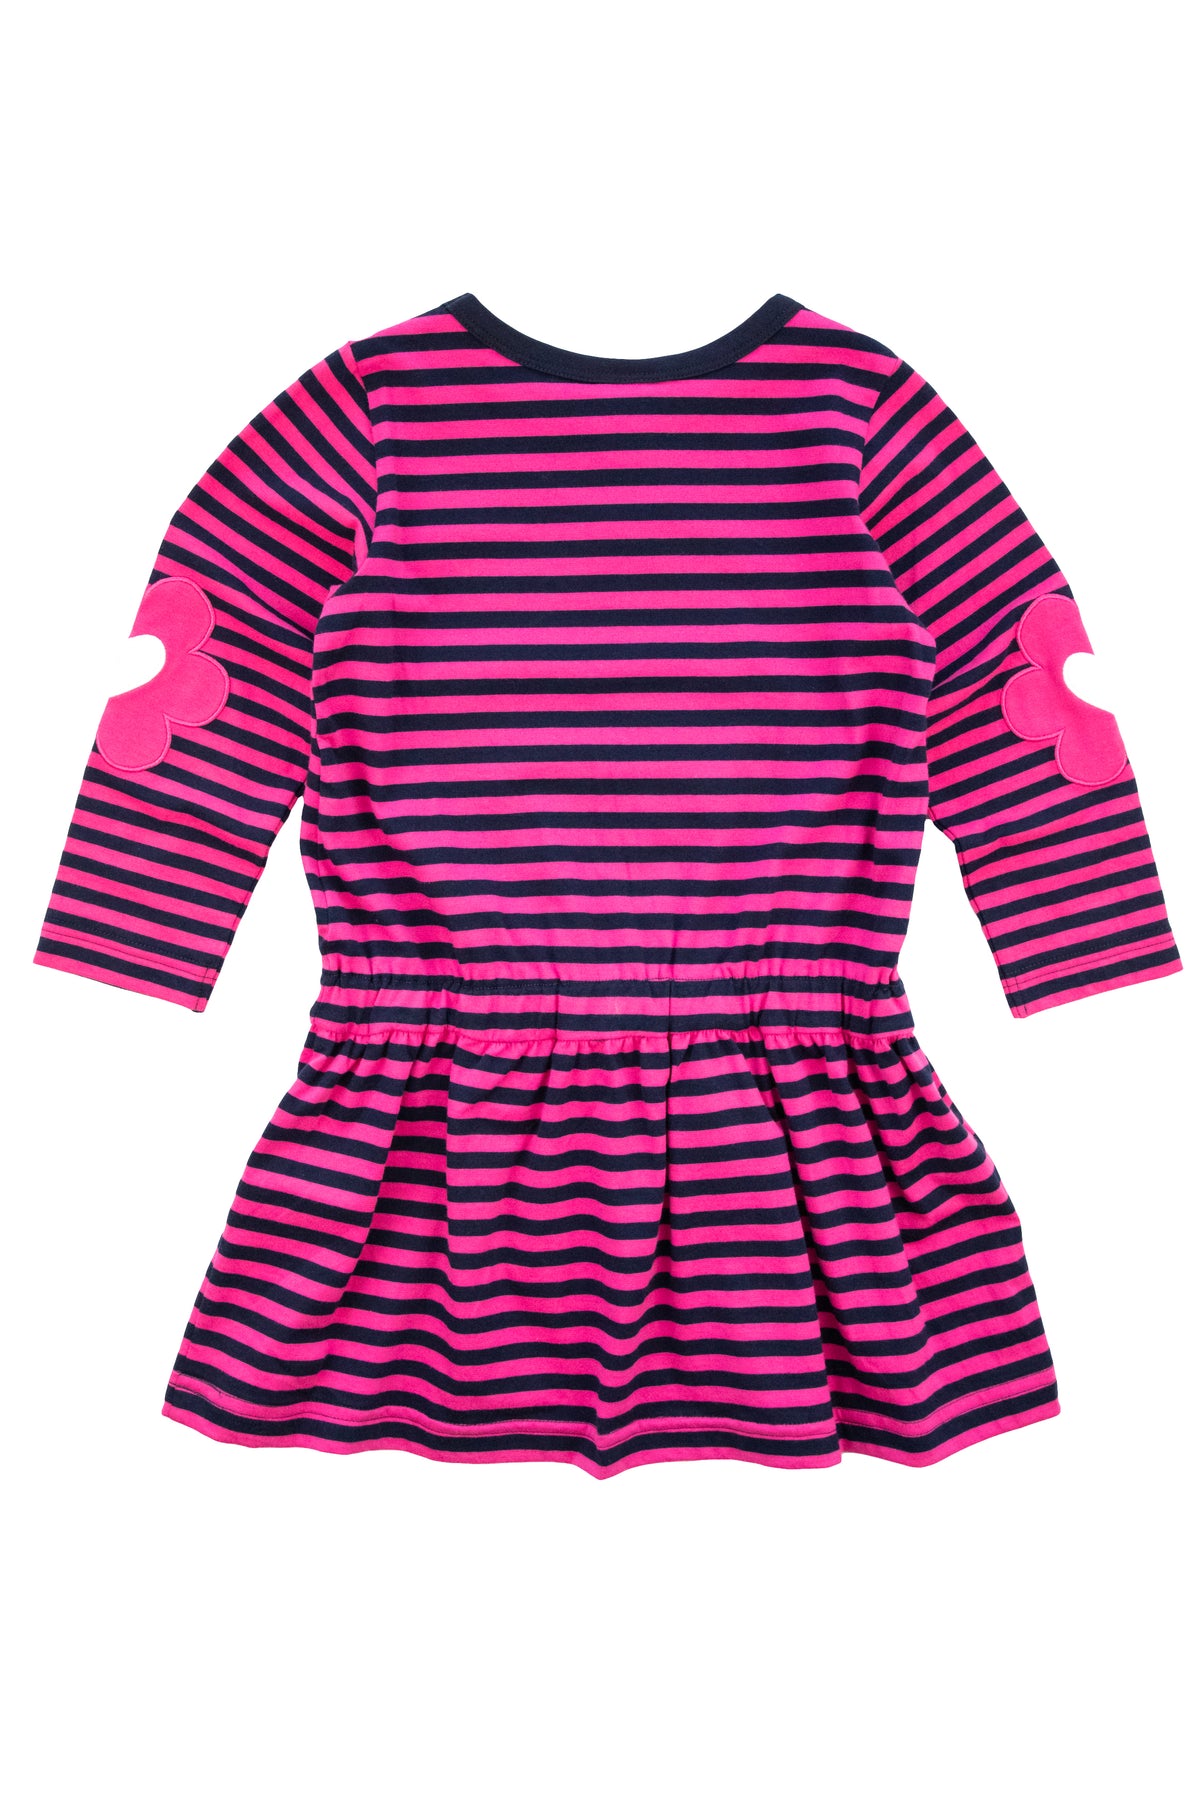 Fuchsia and Navy Stripe Knit Dress With Flowers – Florence Eiseman